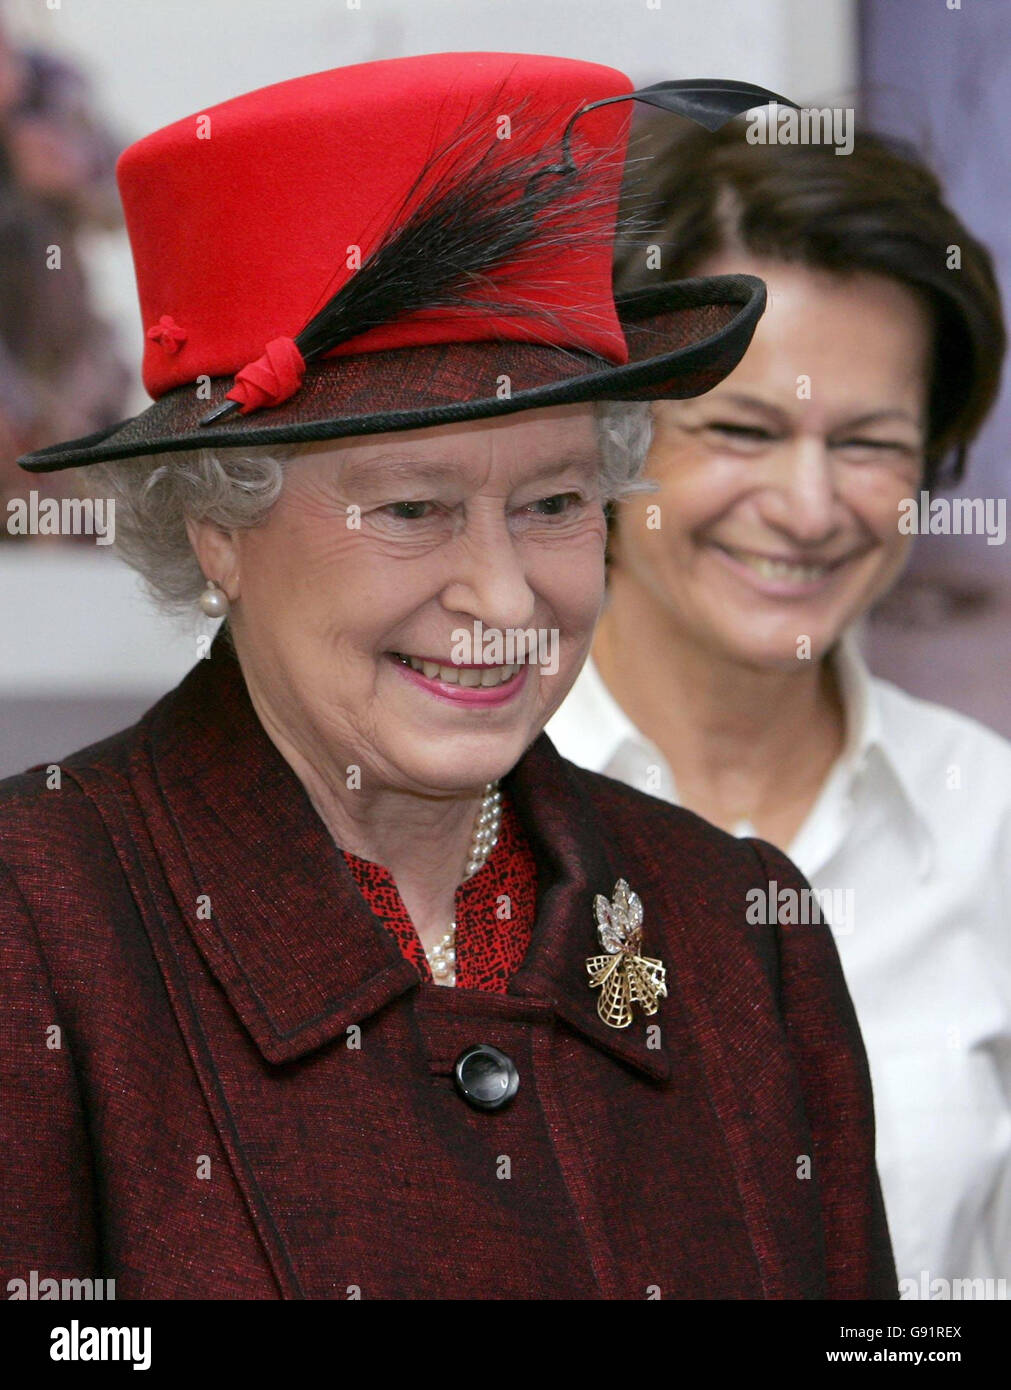 Britain's Queen Elizabeth is shown around, by Reuters' Senior Vice President and Global Head of News and Pictures, during a visit to the new Reuters building at Canary Wharf in London, Tuesday December 13, 2005. Her Majesty conversed fluently in French as she toured the company's global headquarters - and even launched a story about her visit onto the agency's news wire. See PA story ROYAL Reuters. PRESS ASSOCIATION Photo. Photo credit should read: Toby Melville/Reuters/WPA/PA . Stock Photo